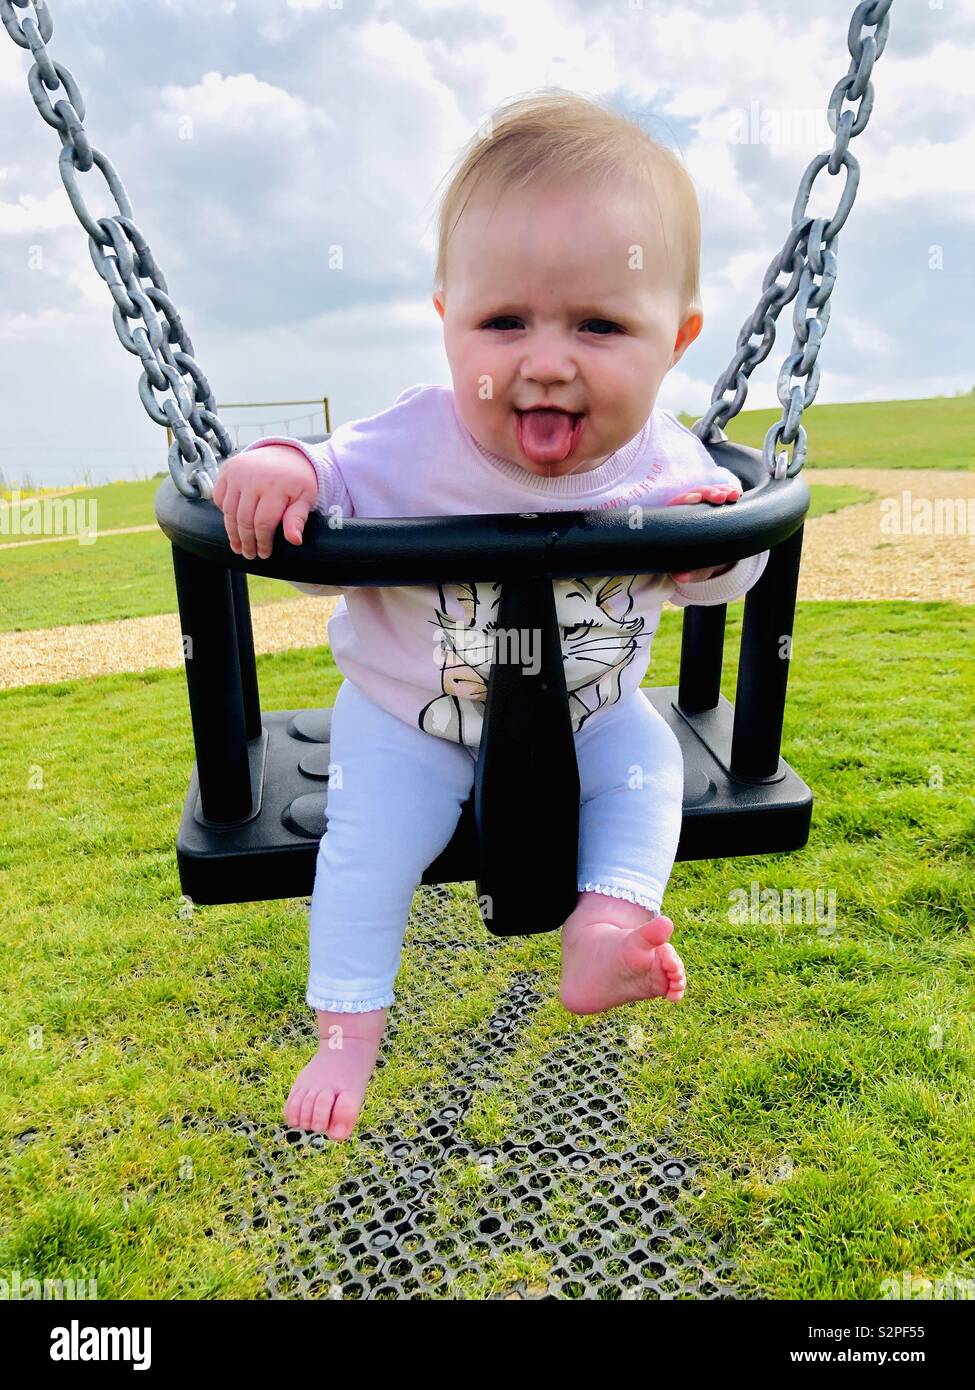 Park fun with daughter Stock Photo